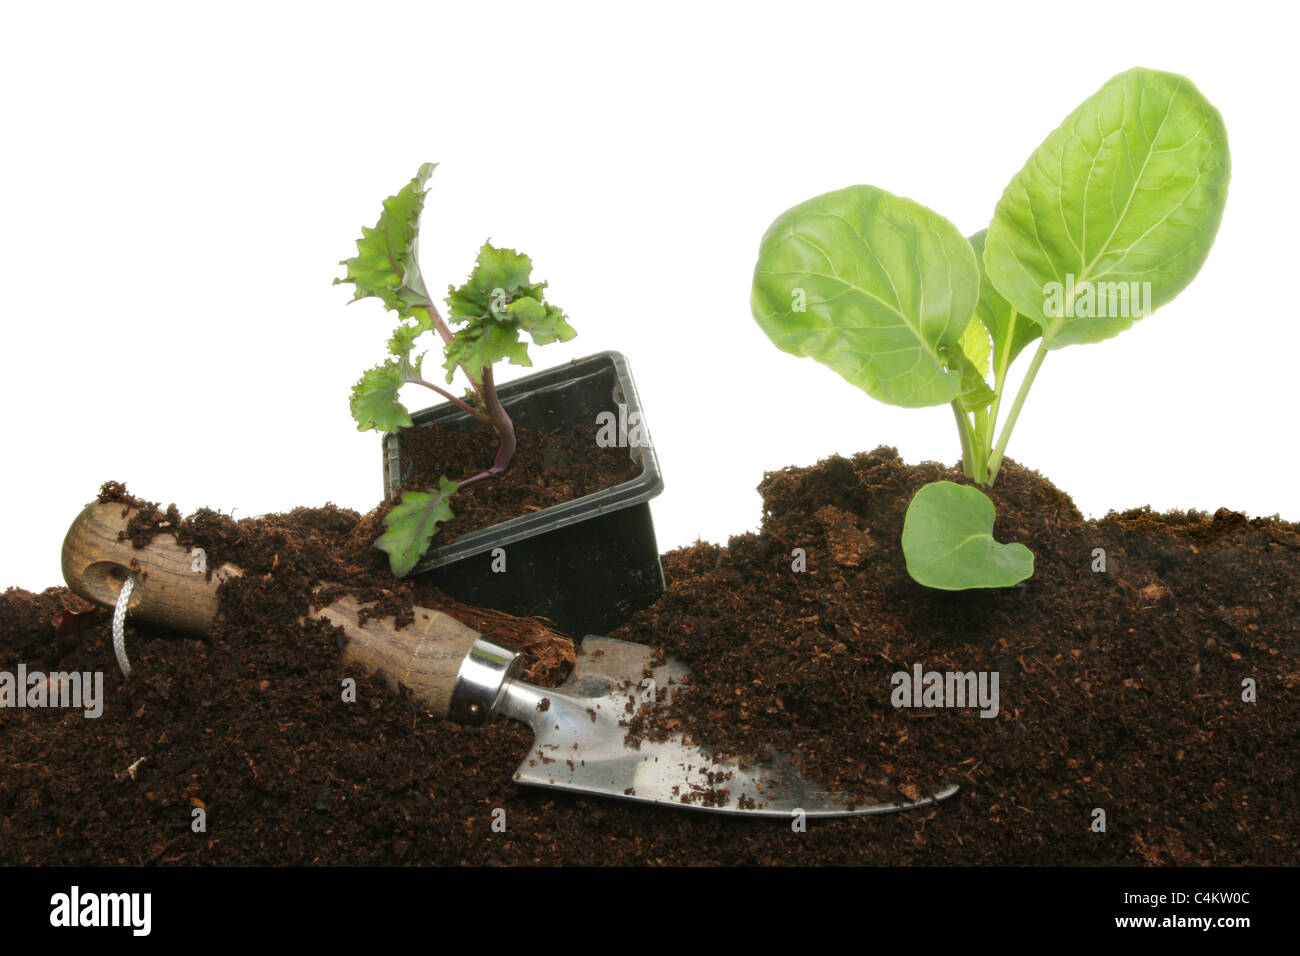 Vegetable plant seedlings in soil and in a plastic pot with a garden trowel Stock Photo